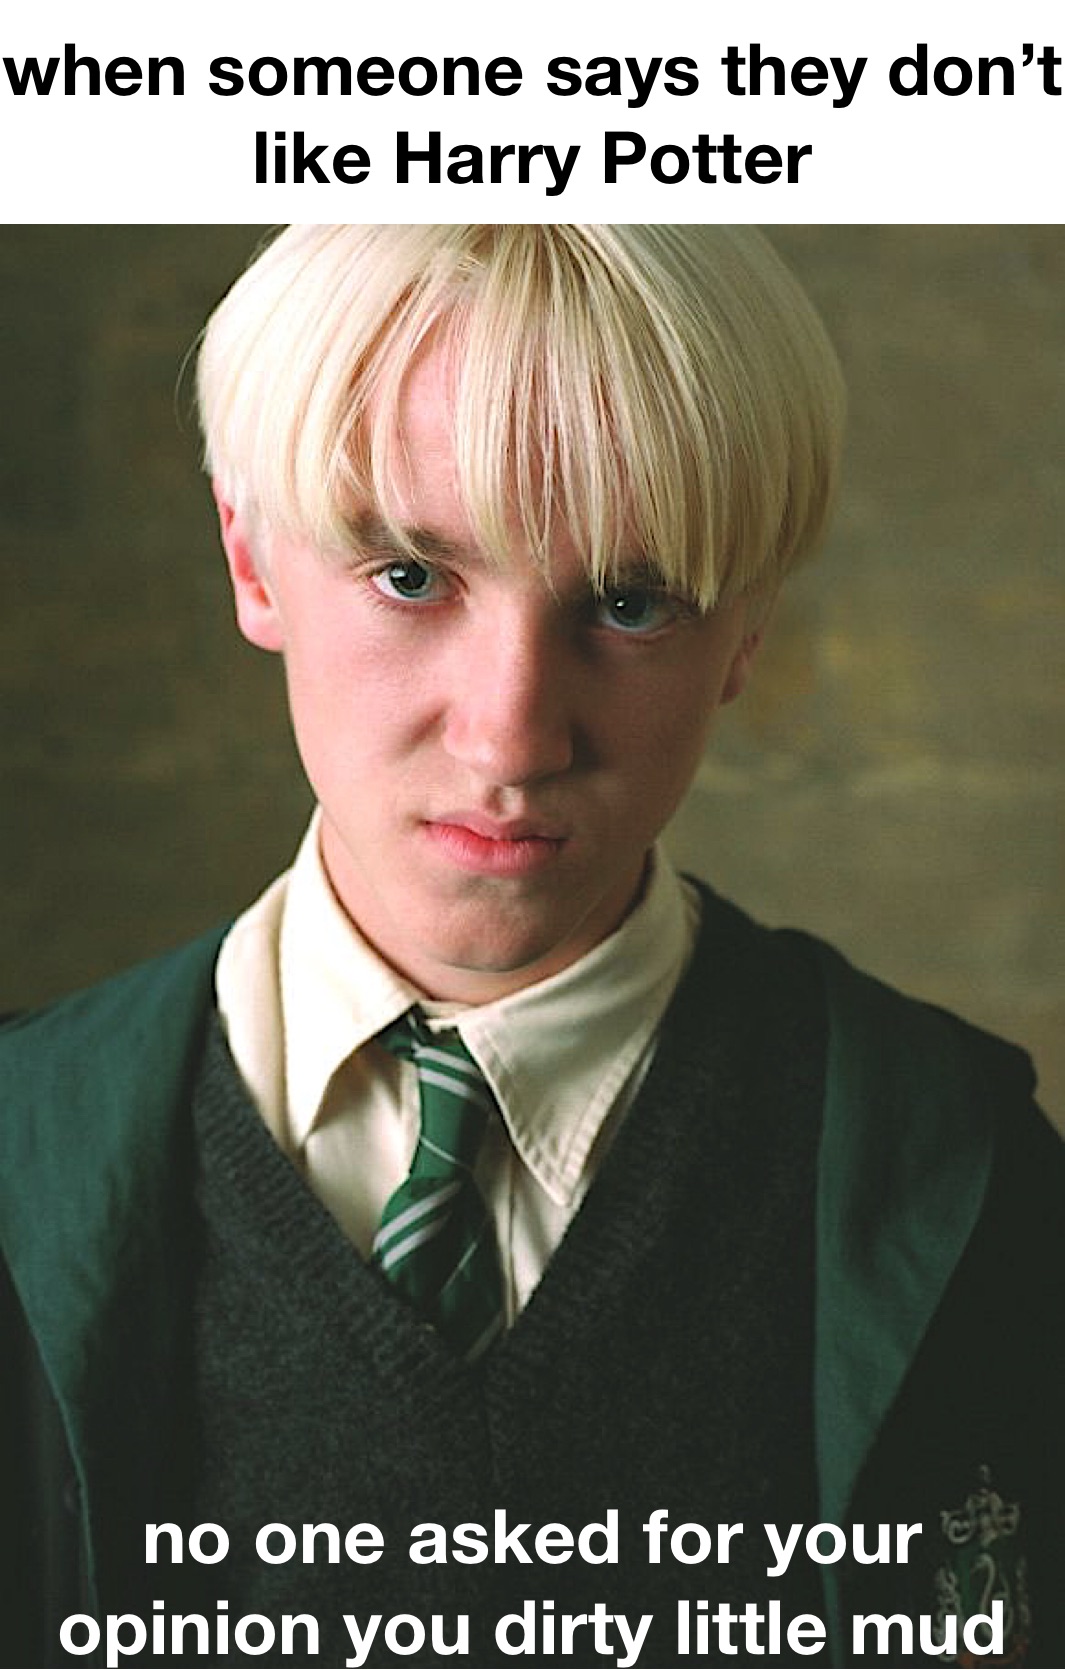 Post by @Draco_malfoy